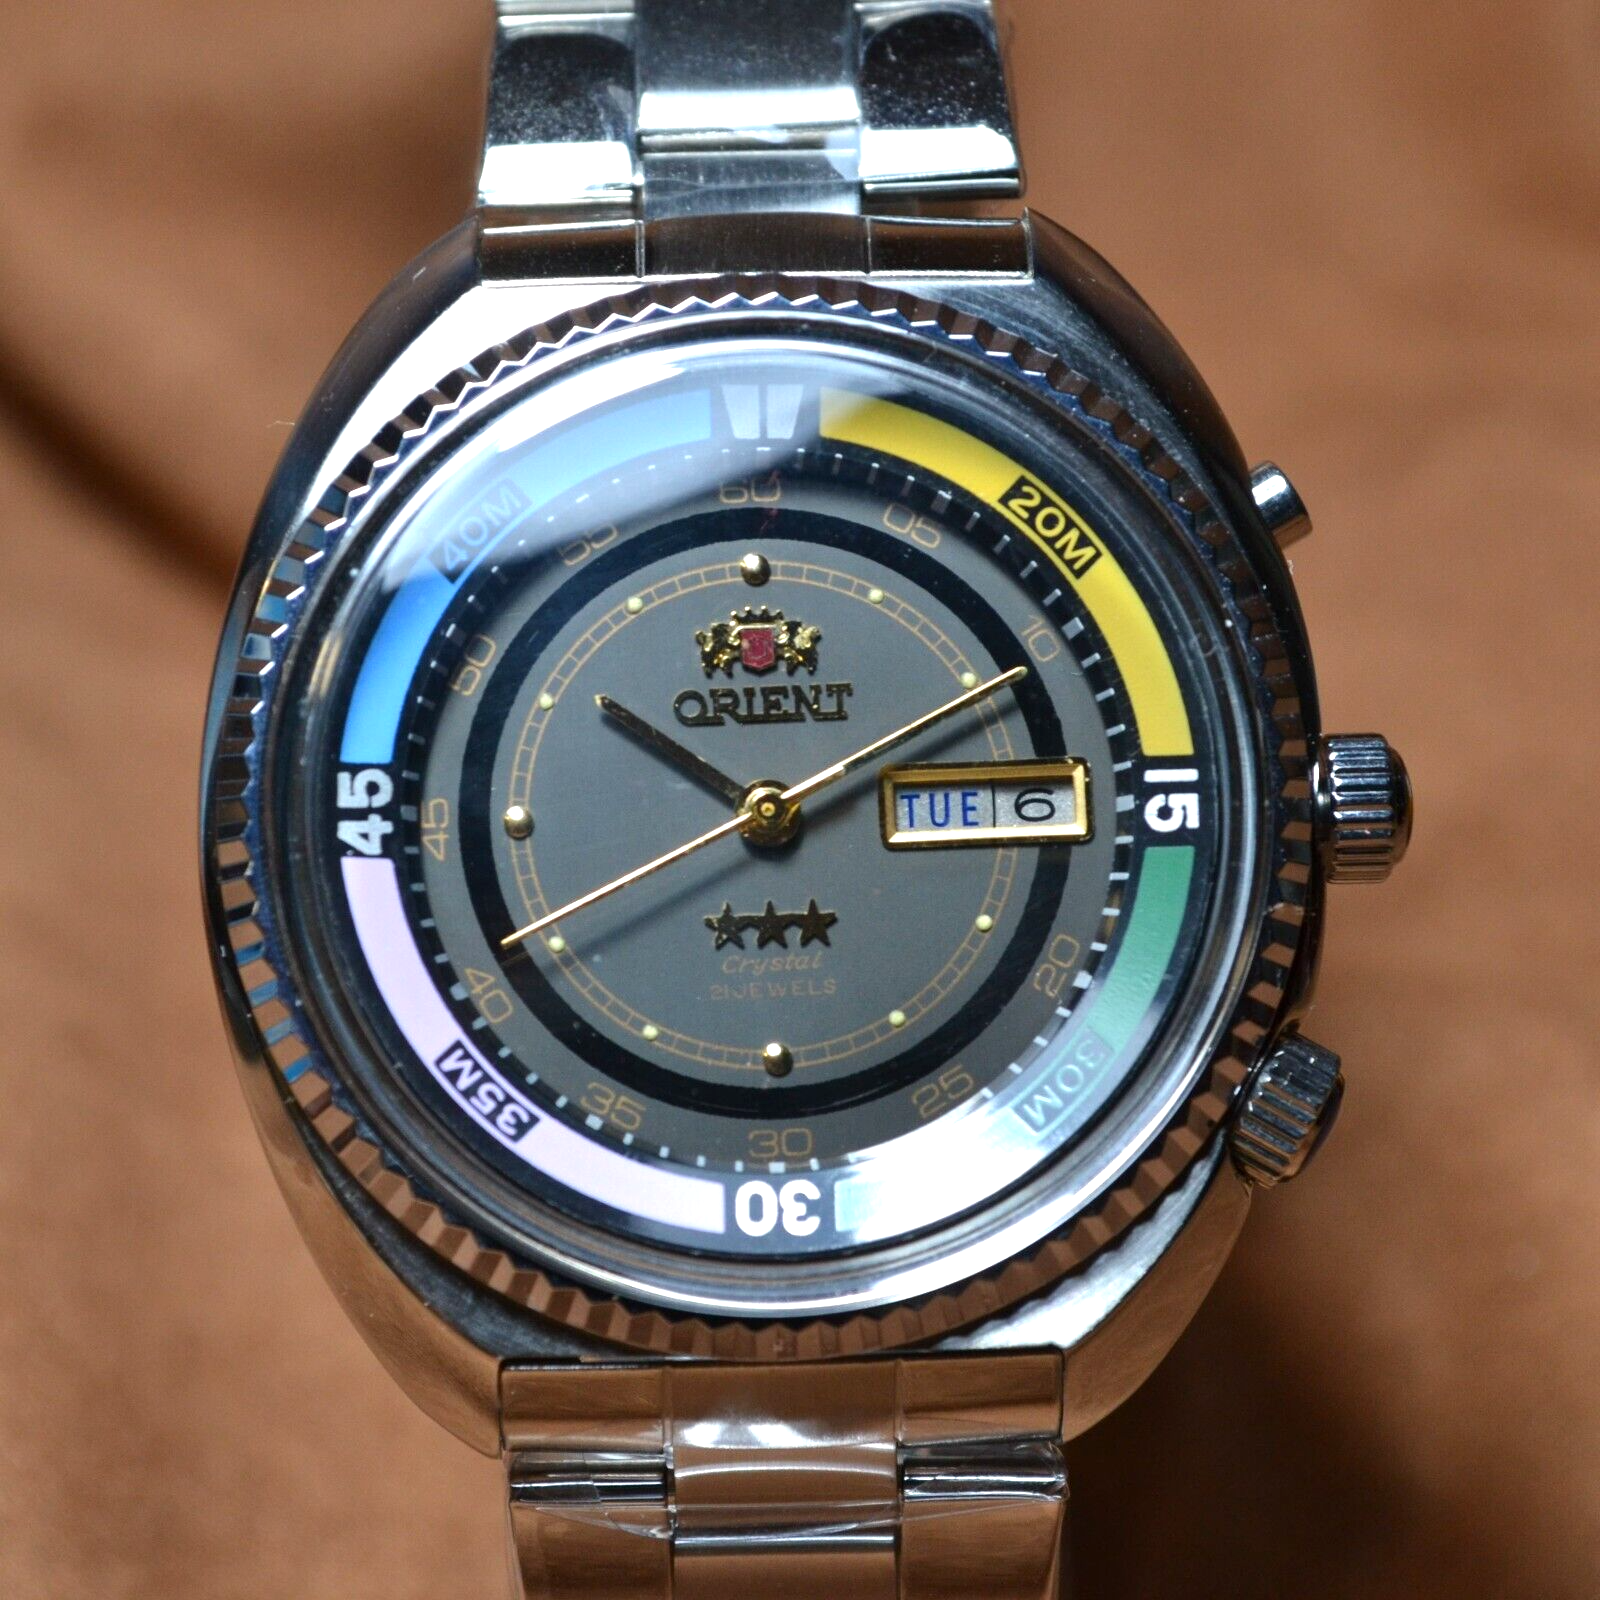 Watch Orient KING DIVER Automatic watch KD 21 JEWELS Original Japan Gray Dial